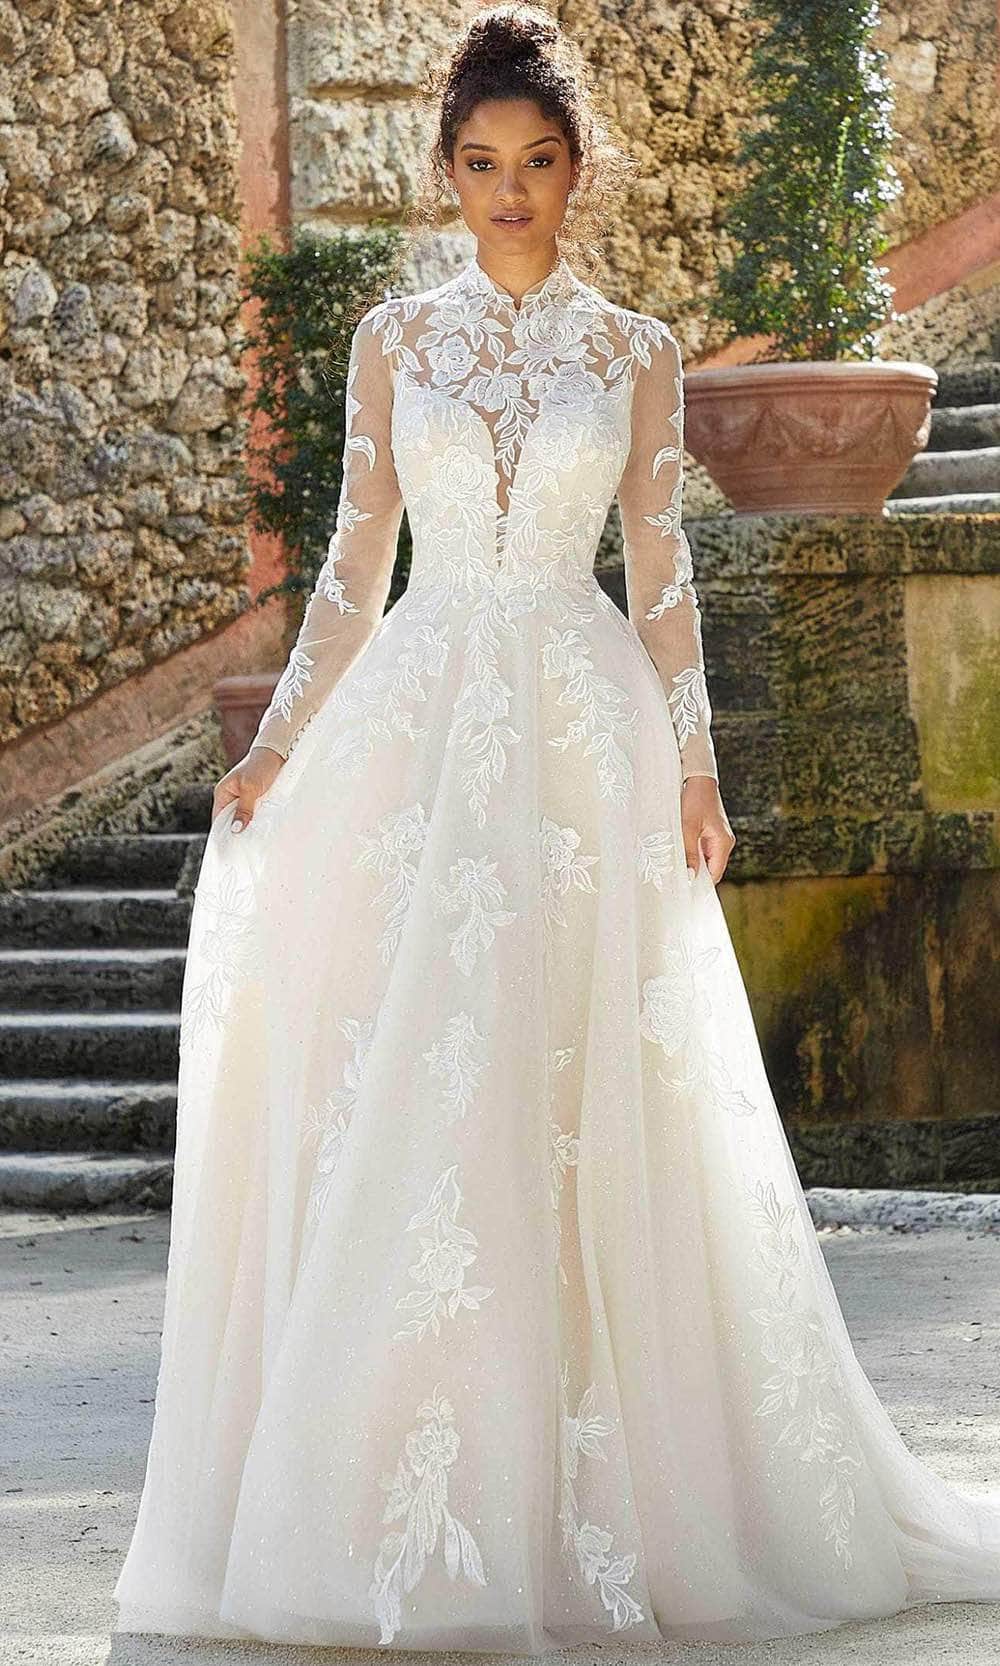 Mori Lee Bridal 2463 - Long Sleeve High Neck Wedding Gown Special Occasion Dress 00 / Ivory/Latte/Honey